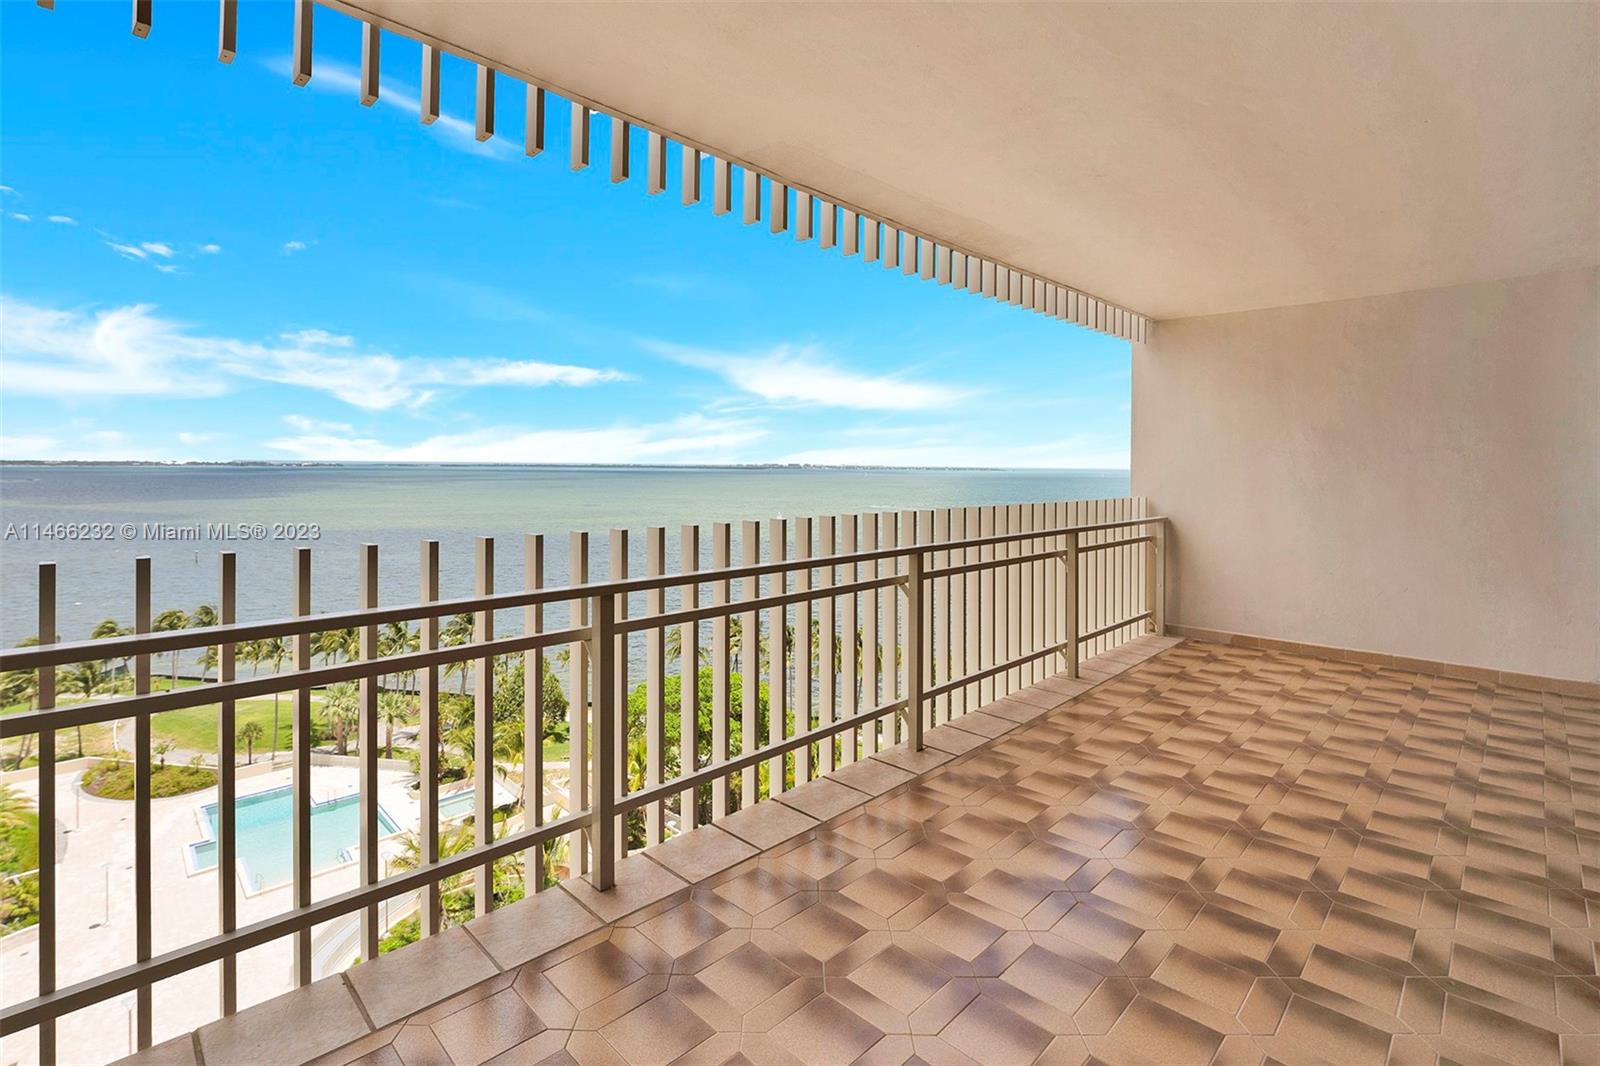 Amazing views from this 2 bedroom 2 bath condo in the private island community of Grove Isle.  Watch all the boats in the Miami bay area pass by from your balcony. Currently building only has pool and gym access.  Construction of new amenities ongoing.  Contact listing agent for more info.